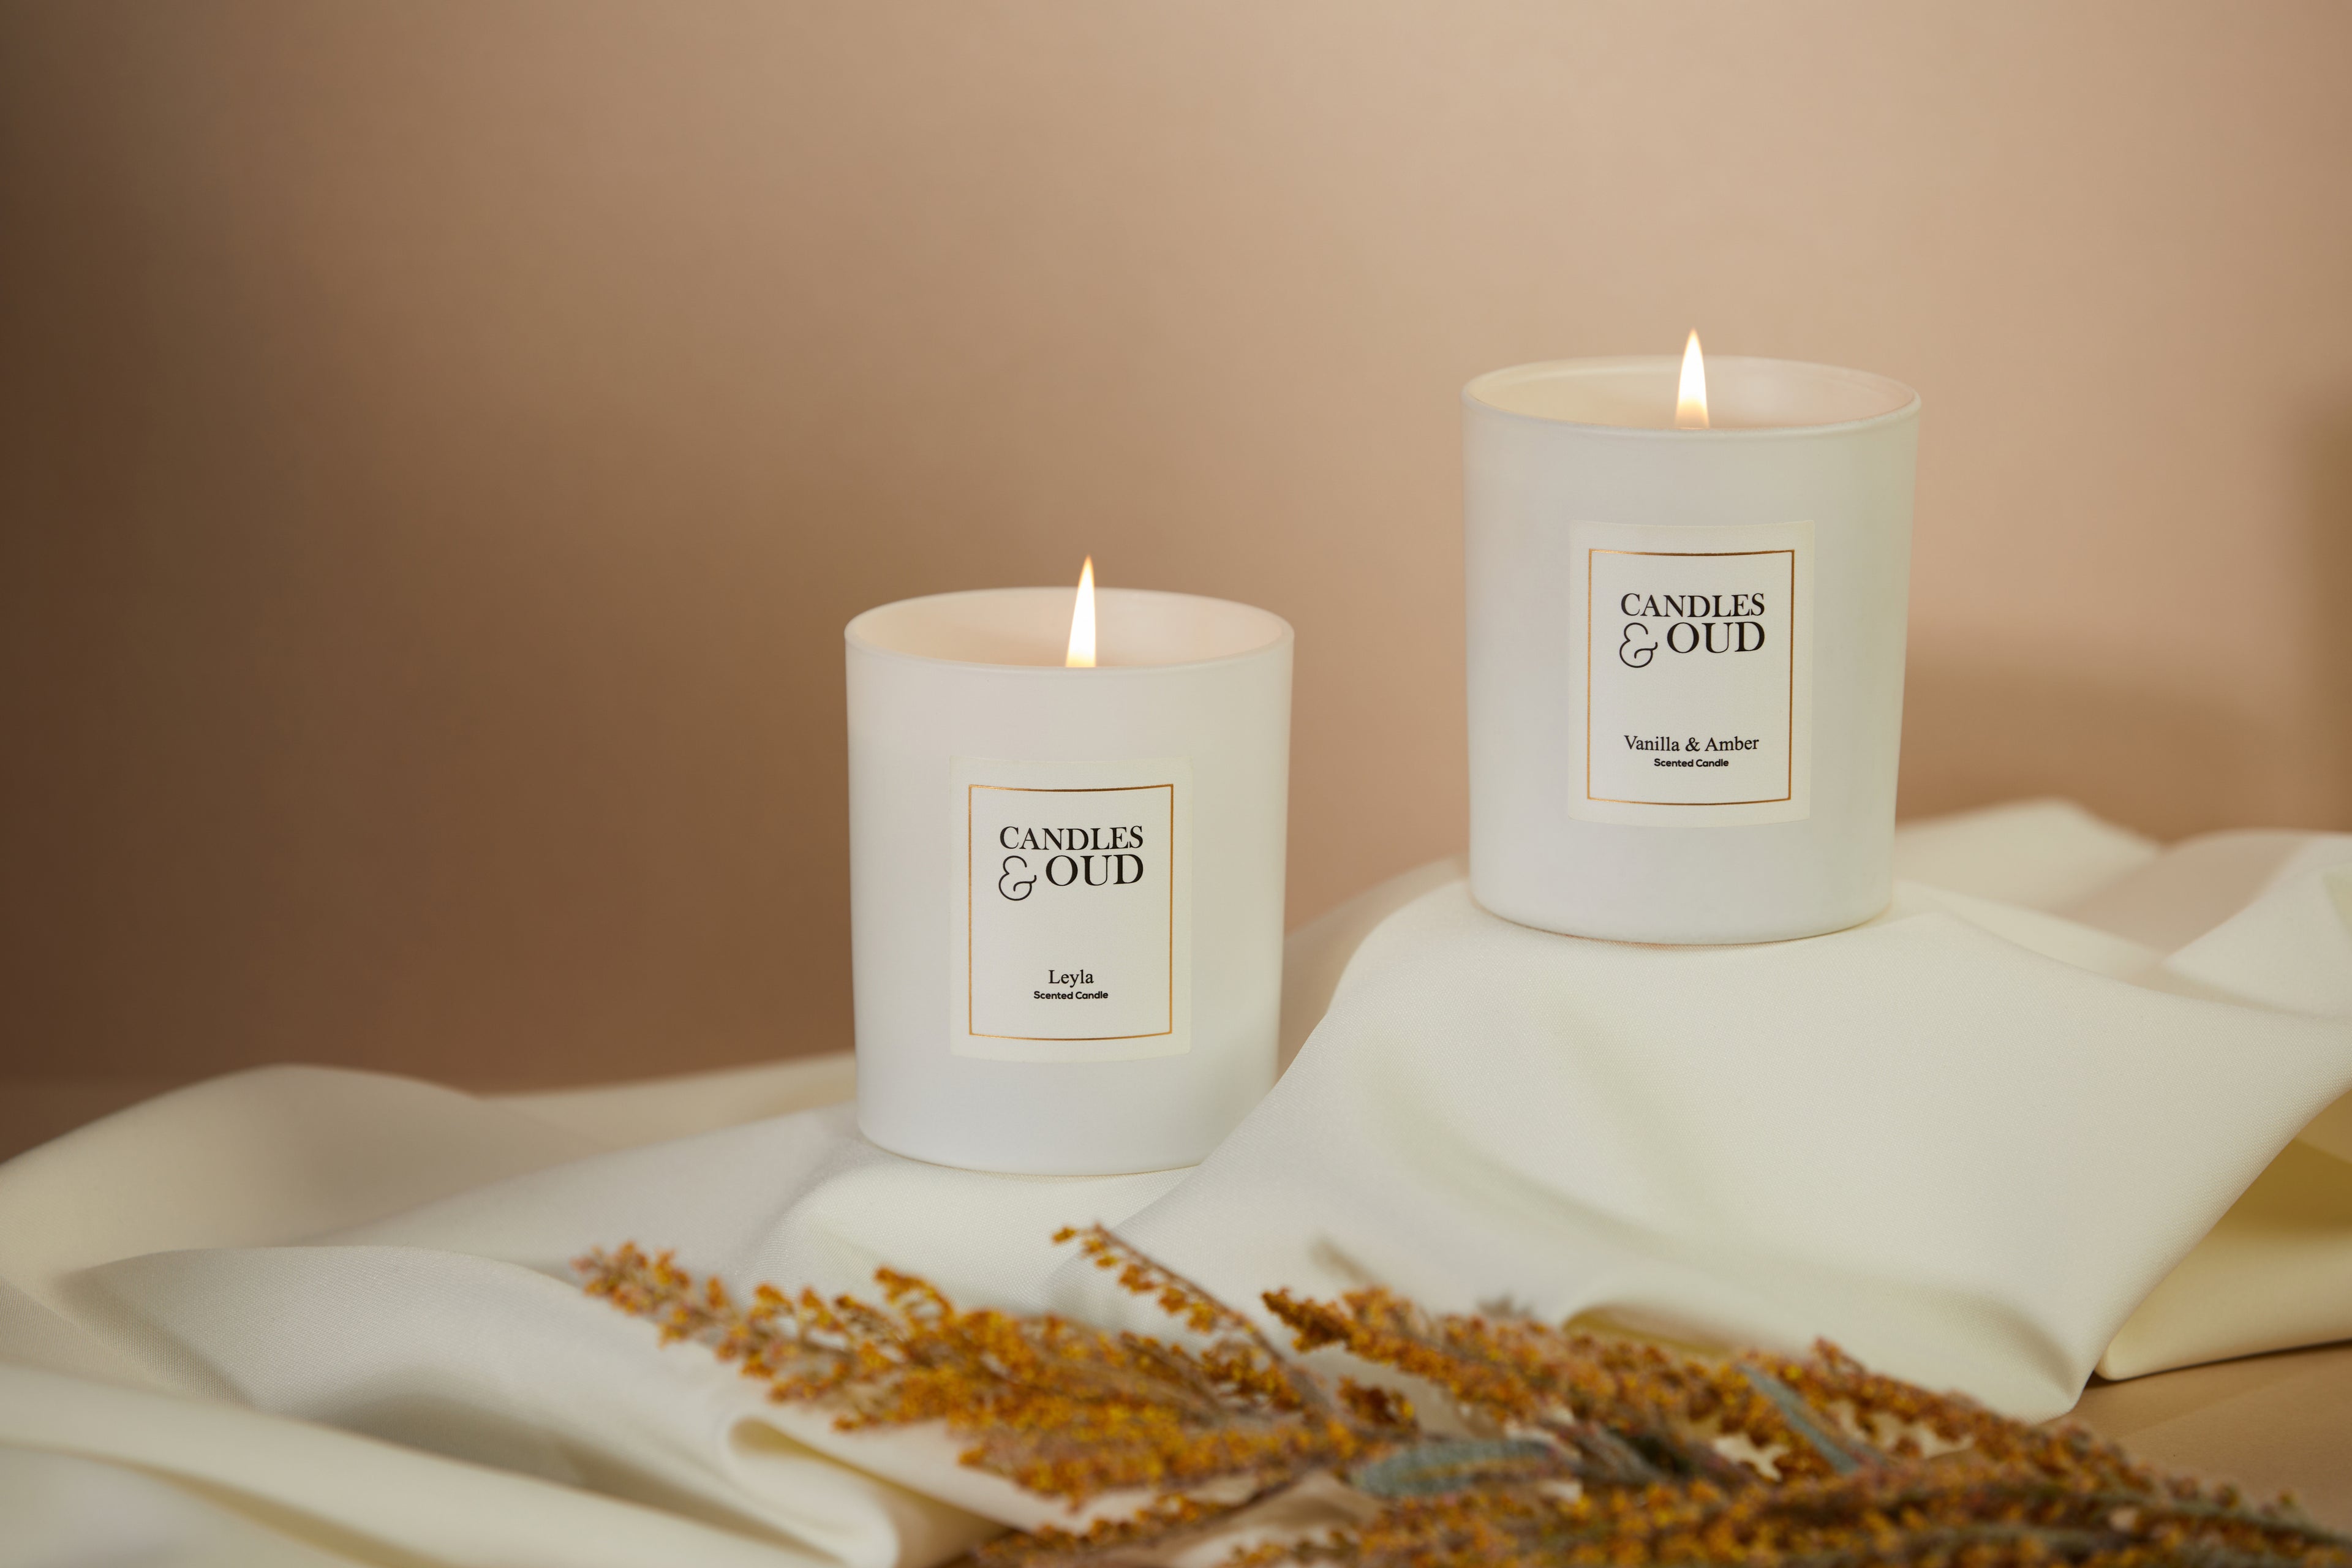 Best Sellers & Top-Rated Candles